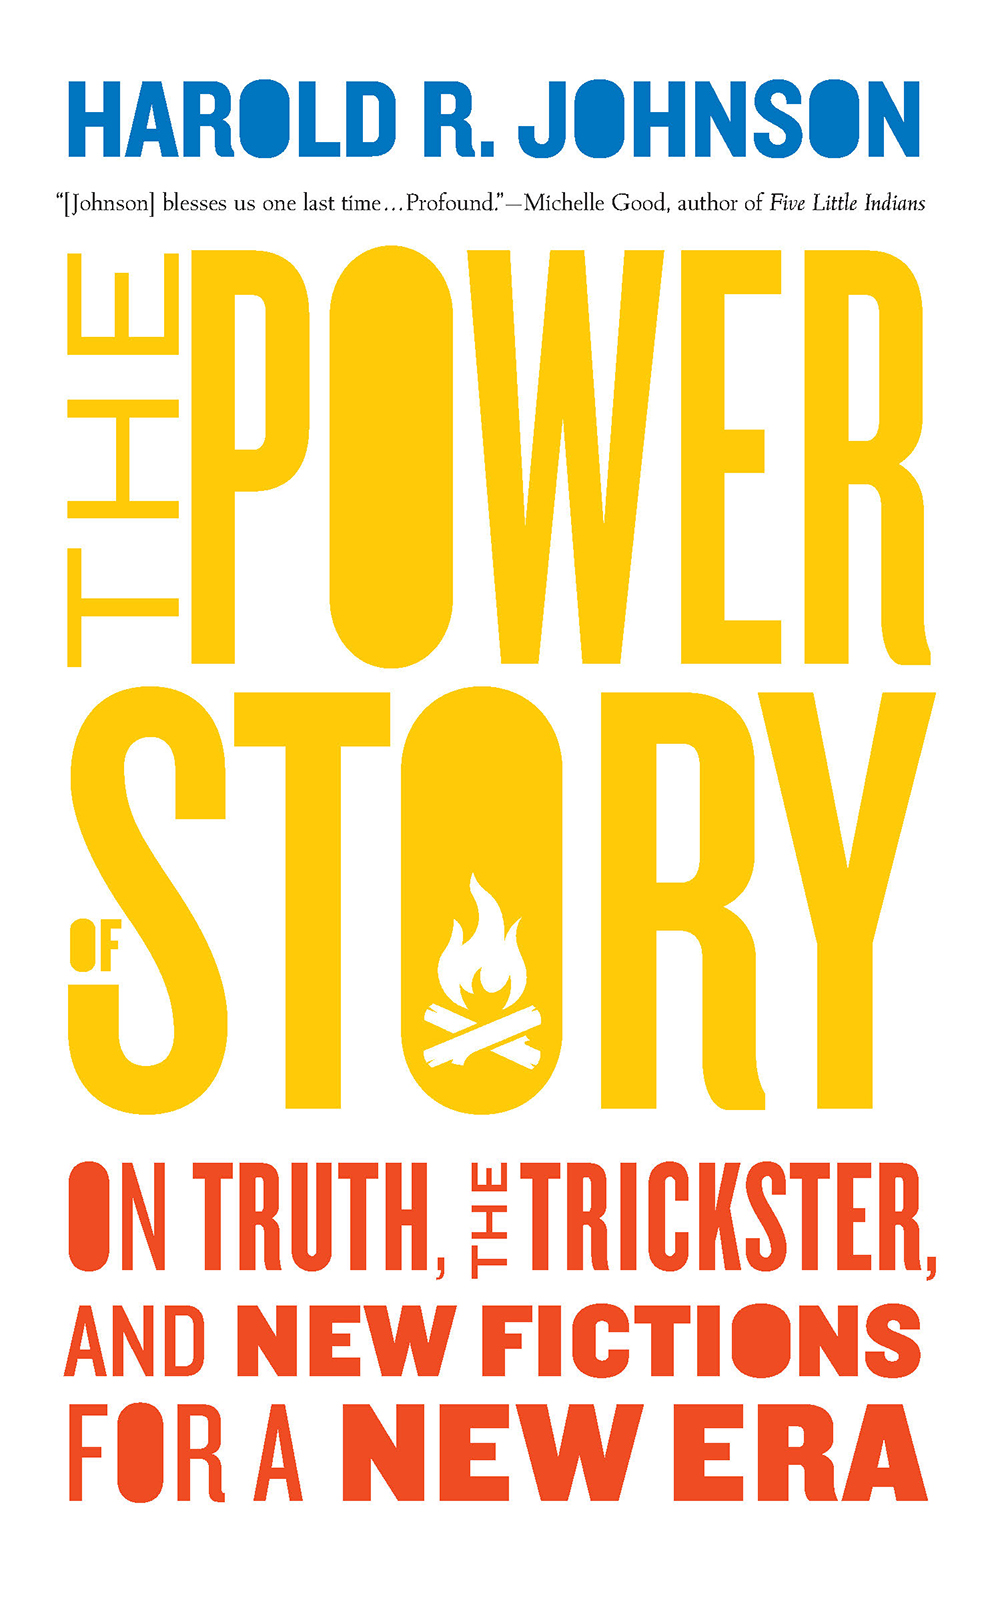 The Power of Story : On Truth, the Trickster, and New Fictions for a New Era | Johnson, Harold R.